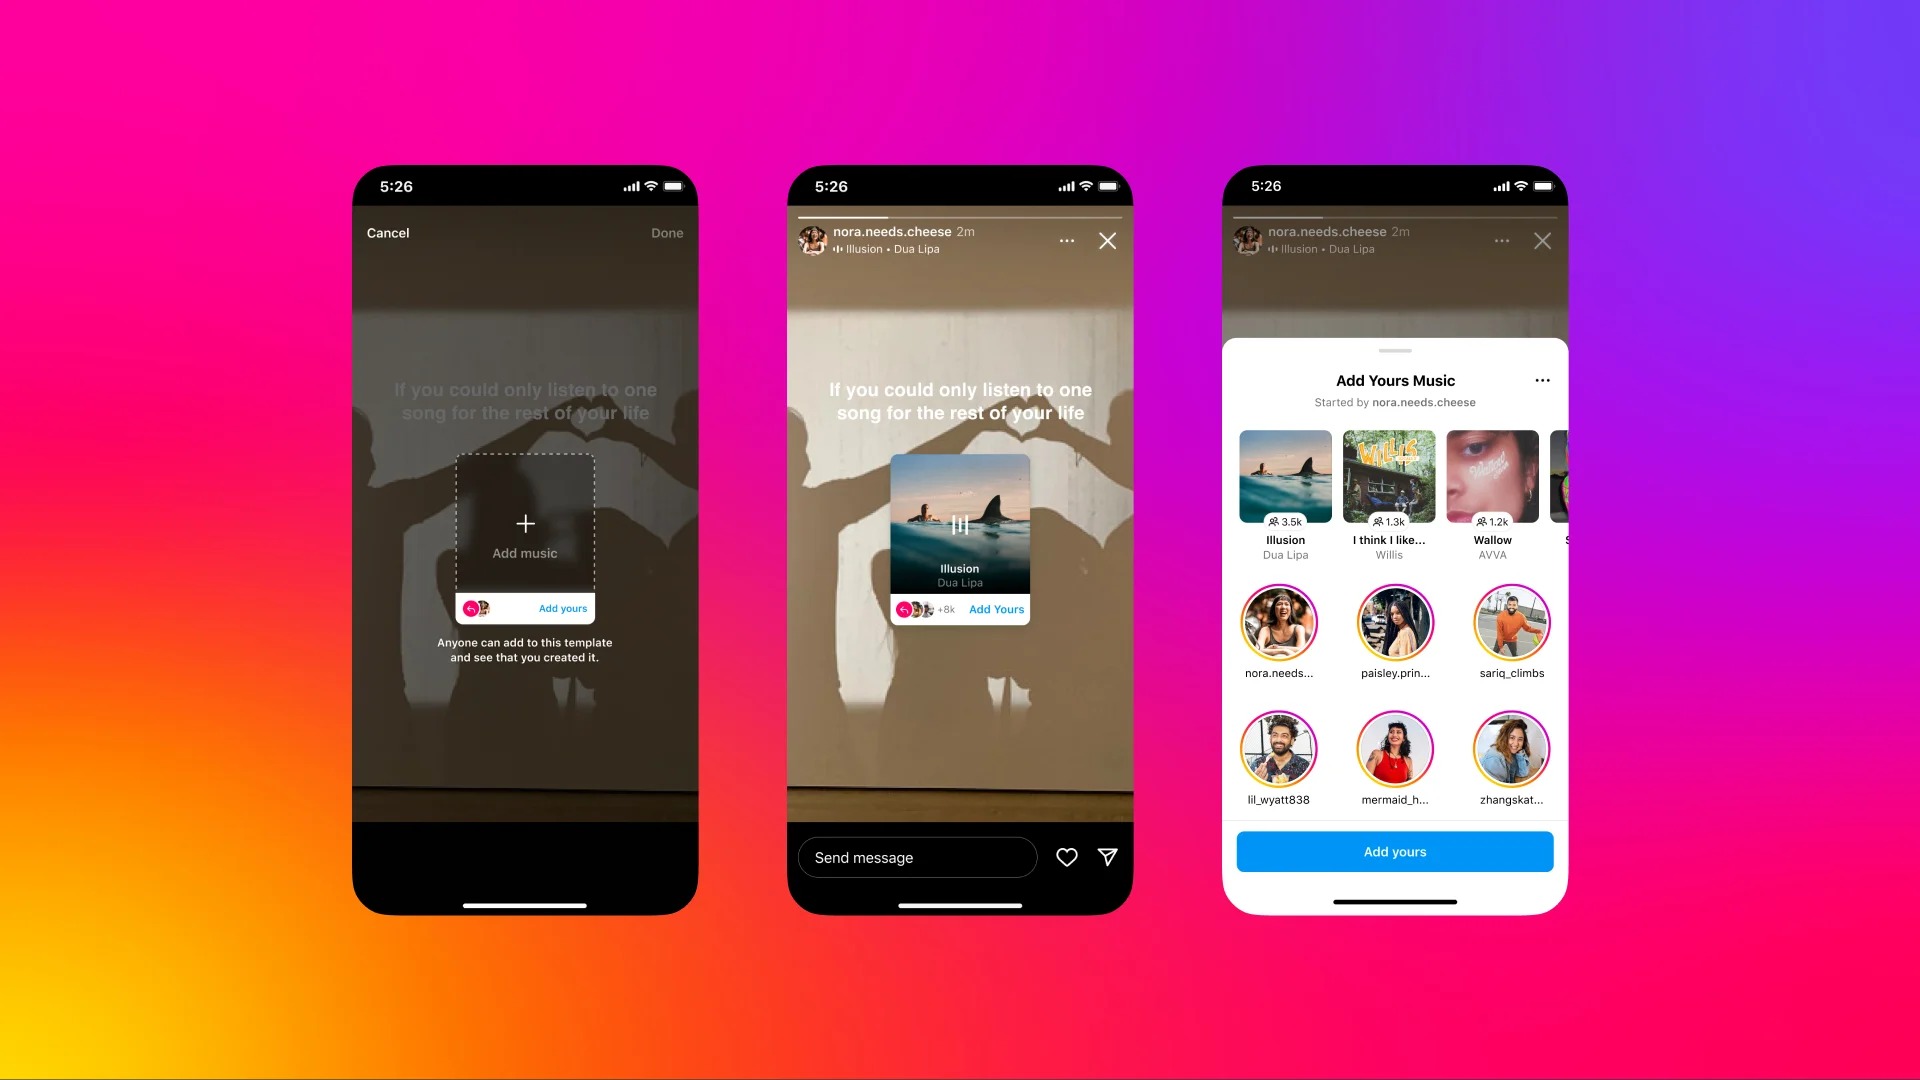 Instagram’s new music sticker and how to use it